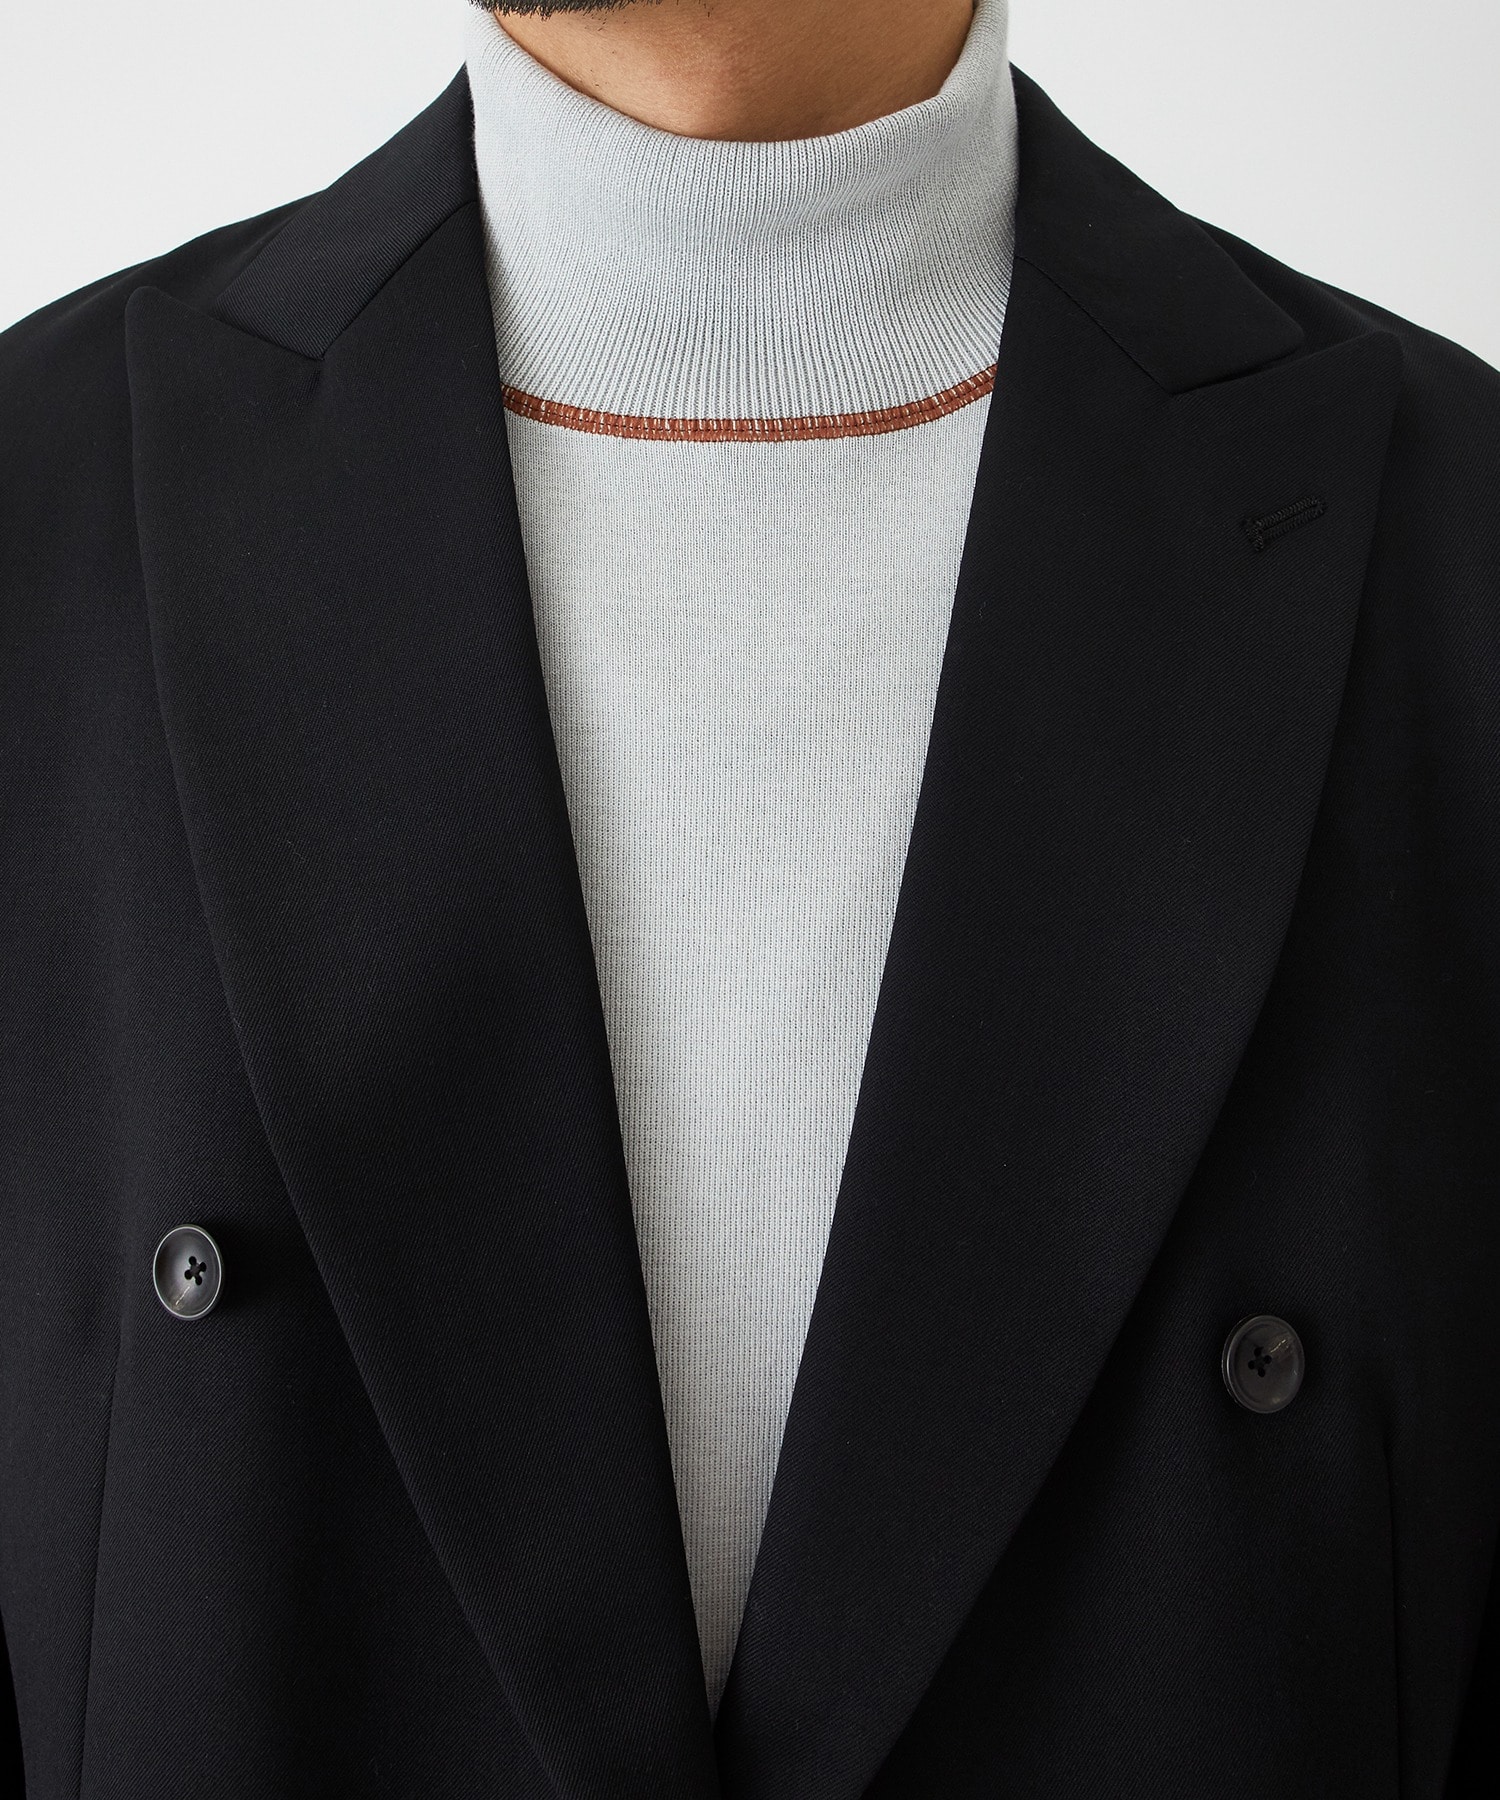 WOOL TWILL BELTED JACKET LiNoH